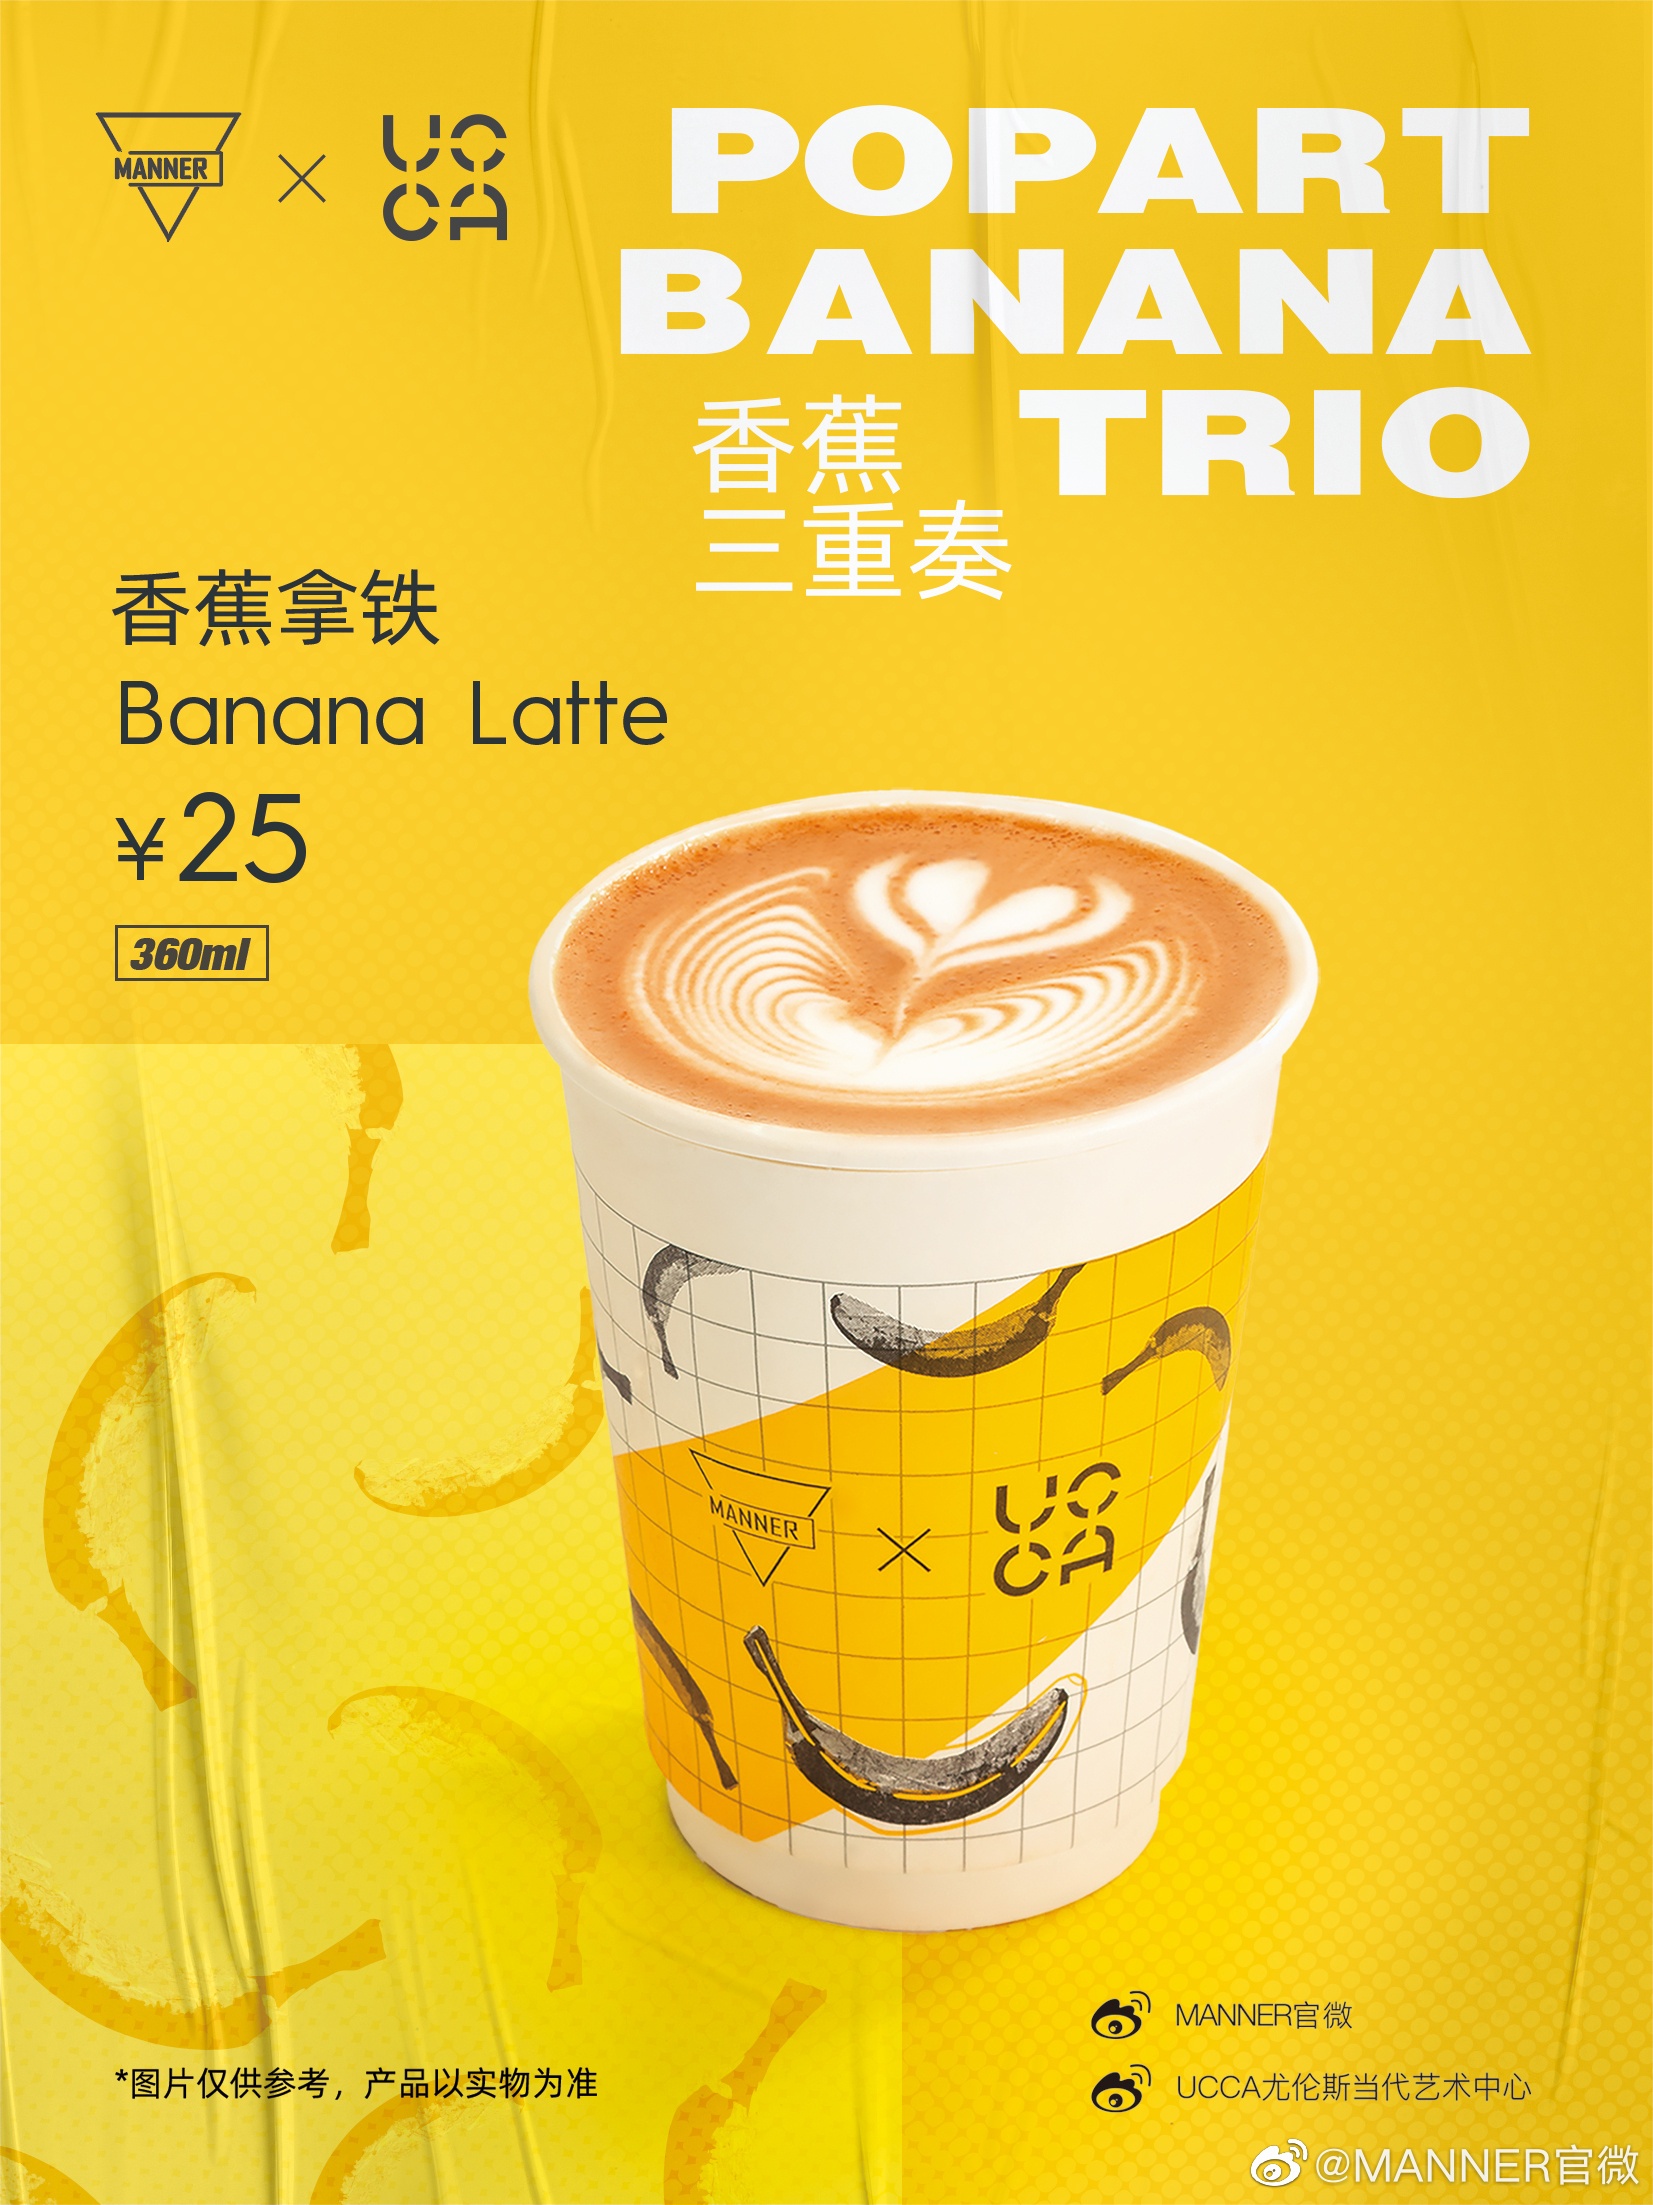 Manner Coffee's Banana Latte collab with UCCA veered into merch territory. Image: Manner Coffee Weibo